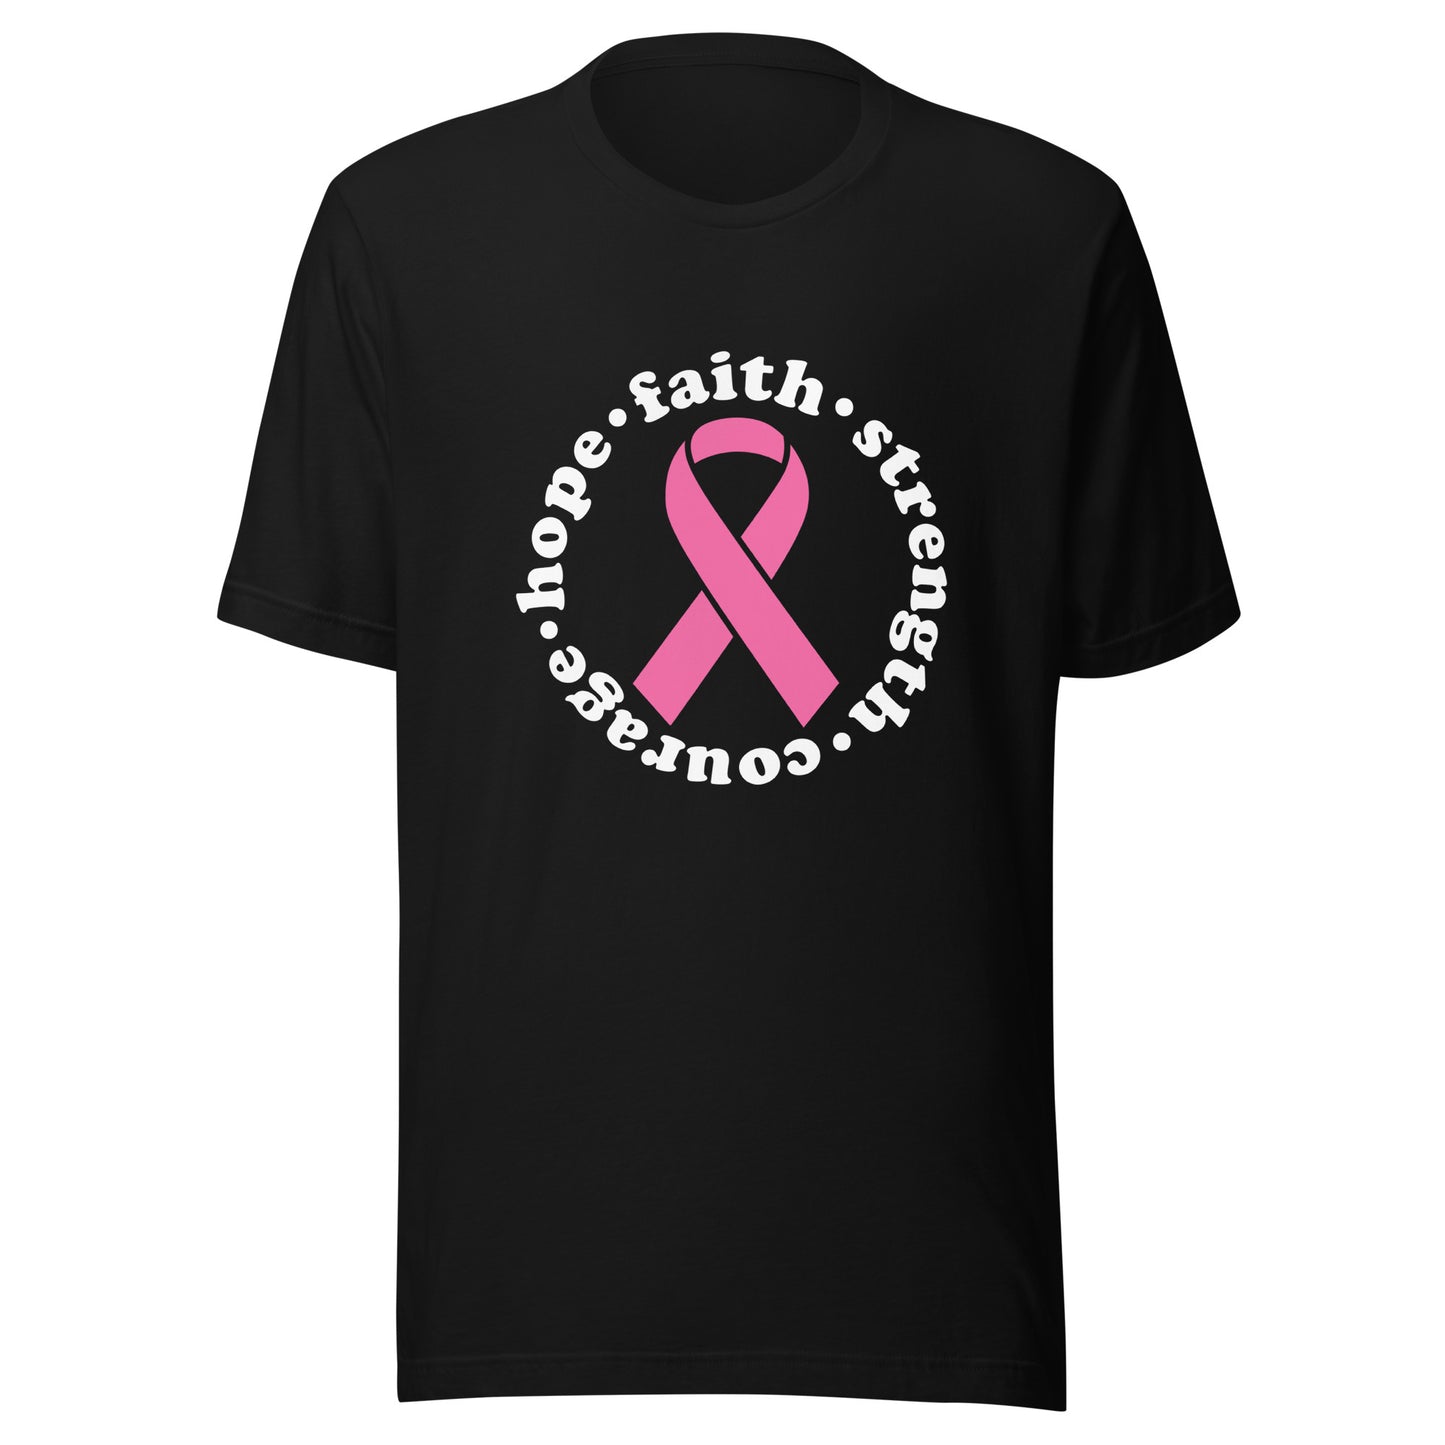 Faith Hope Strength Courage - Breast Cancer Support - Survivor - Awareness Pink Ribbon Unisex T-shirt